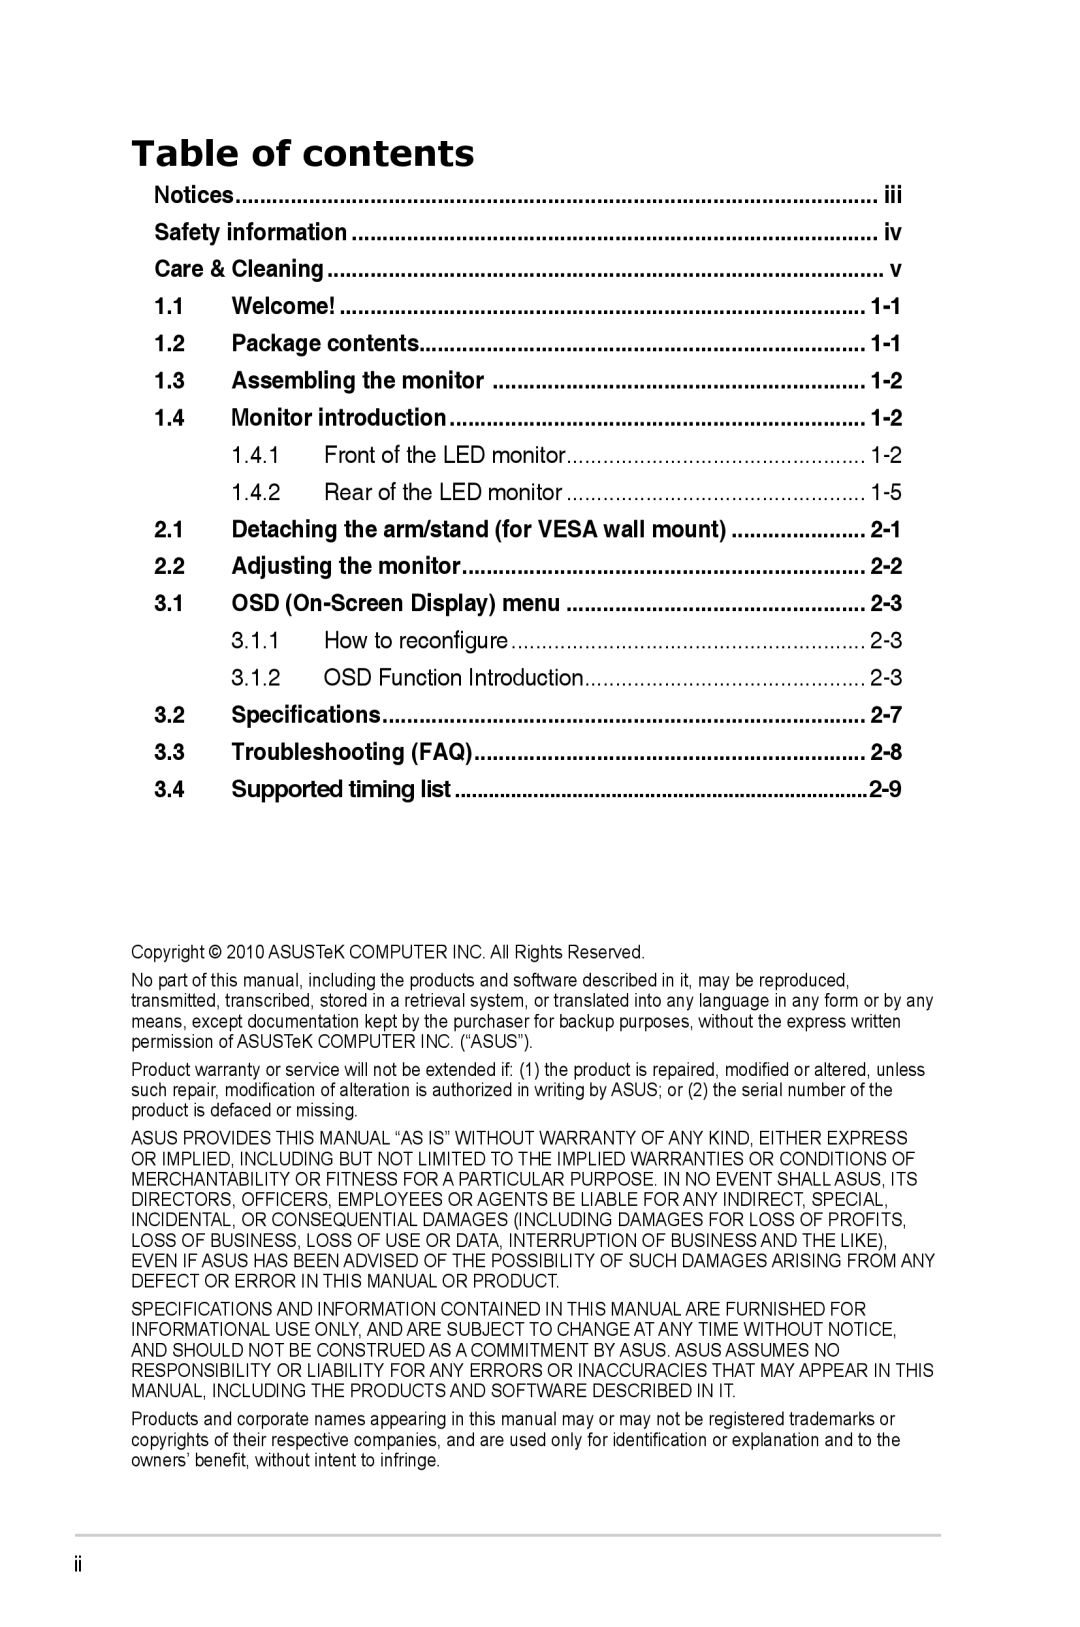 Sears VW199 manual Table of contents, 1.4.1, 1.4.2, 3.1.1, 3.1.2 